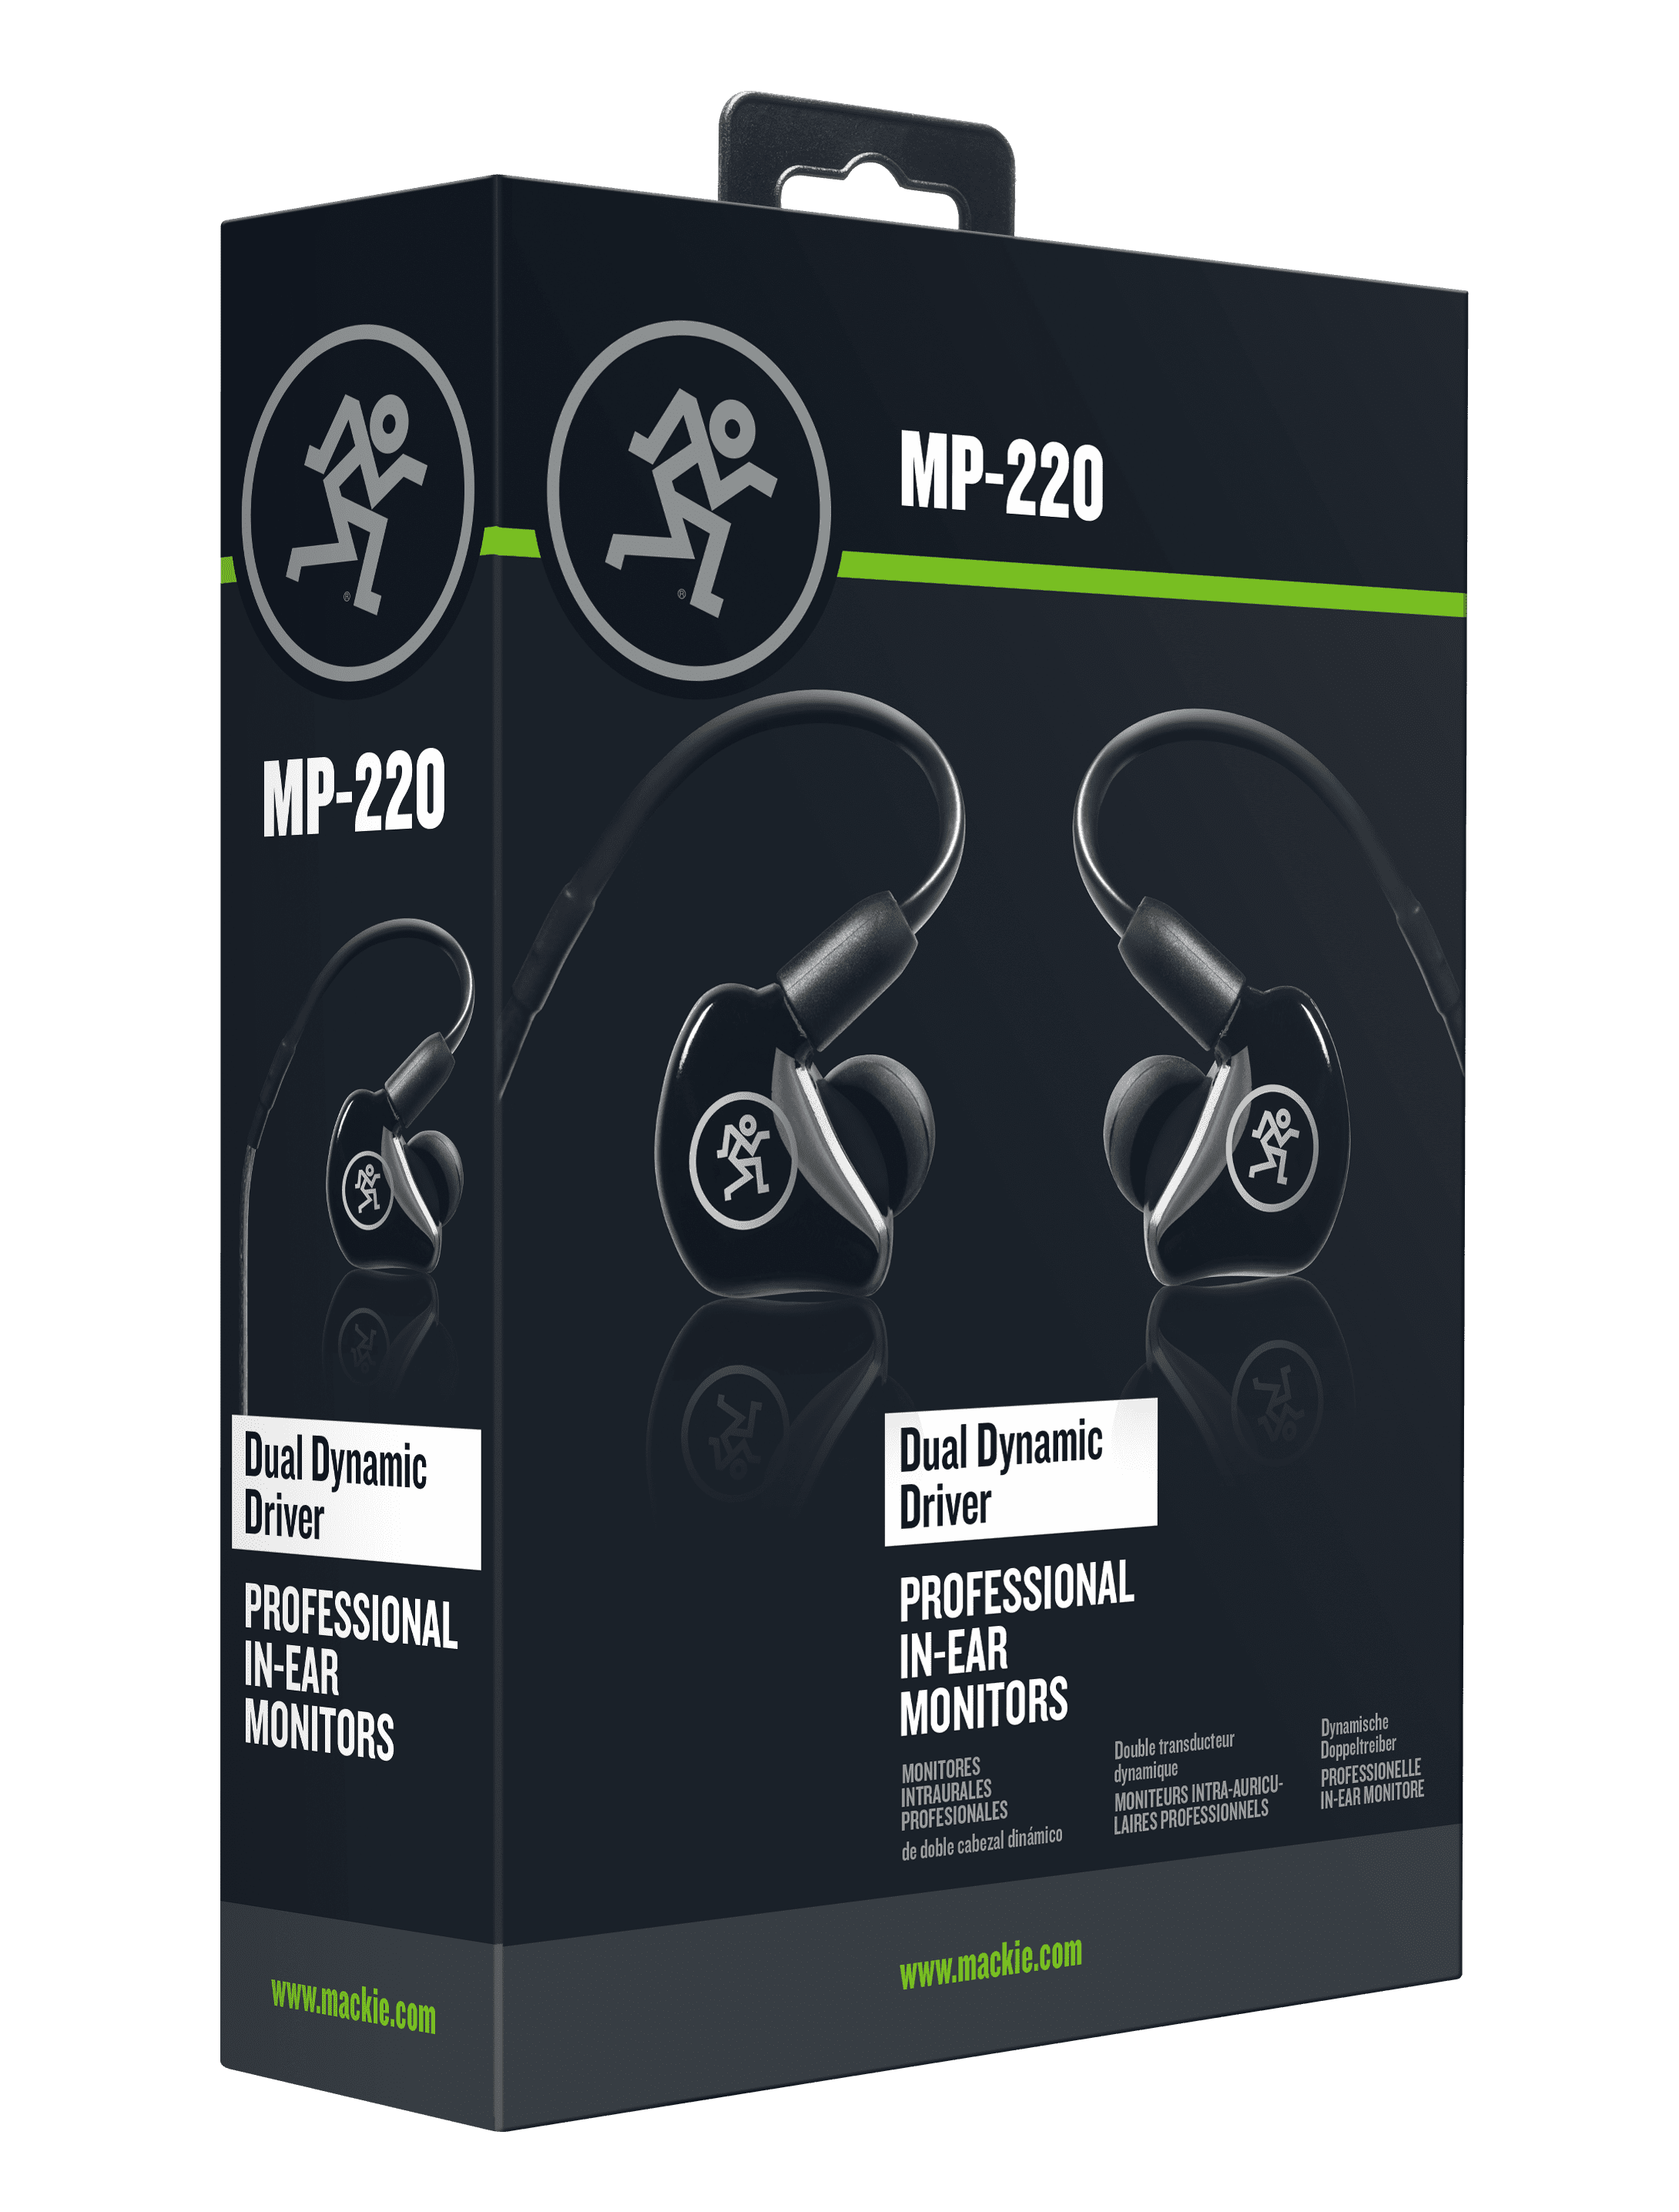 Mackie Mp-220-bta - Ecouteur Intra-auriculaire - Variation 1